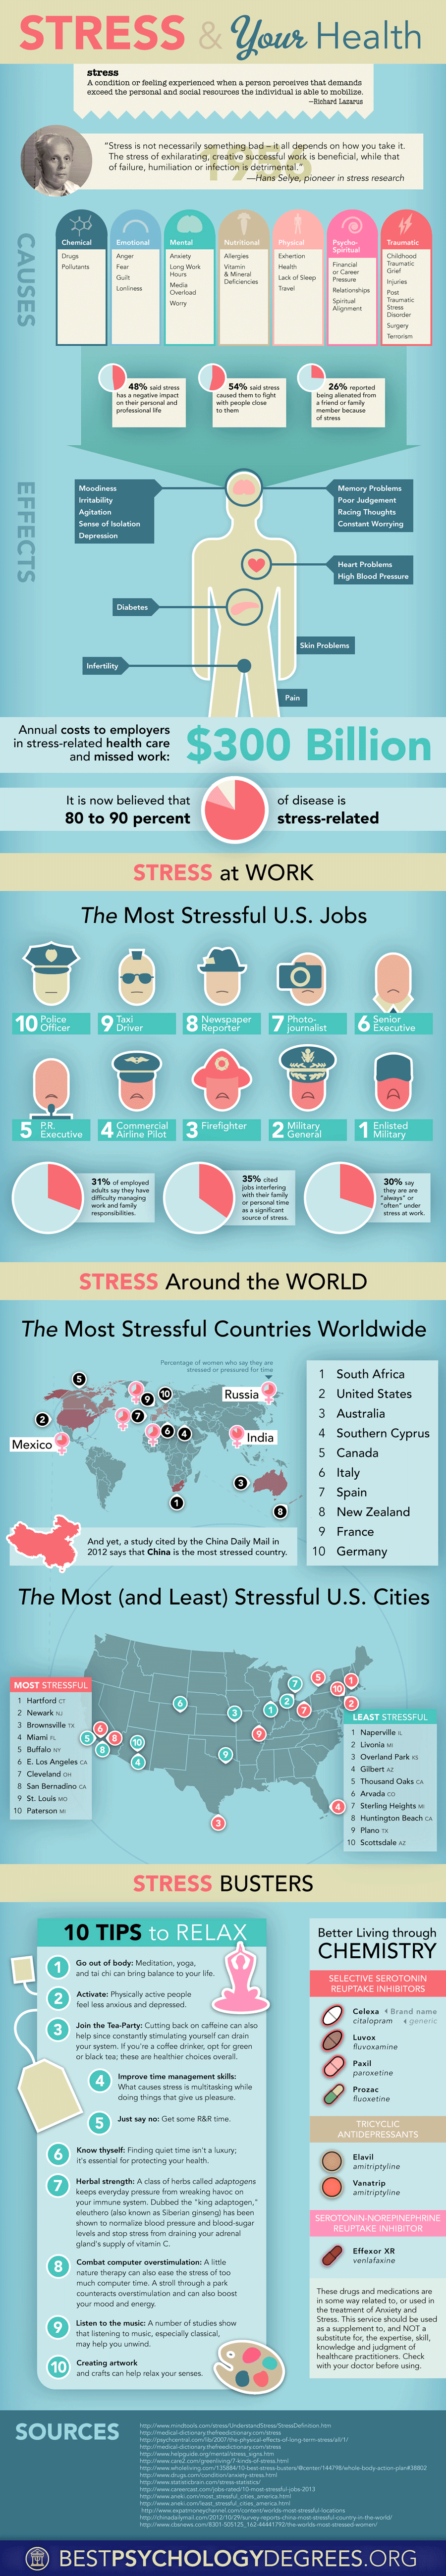 Stress & Your Health